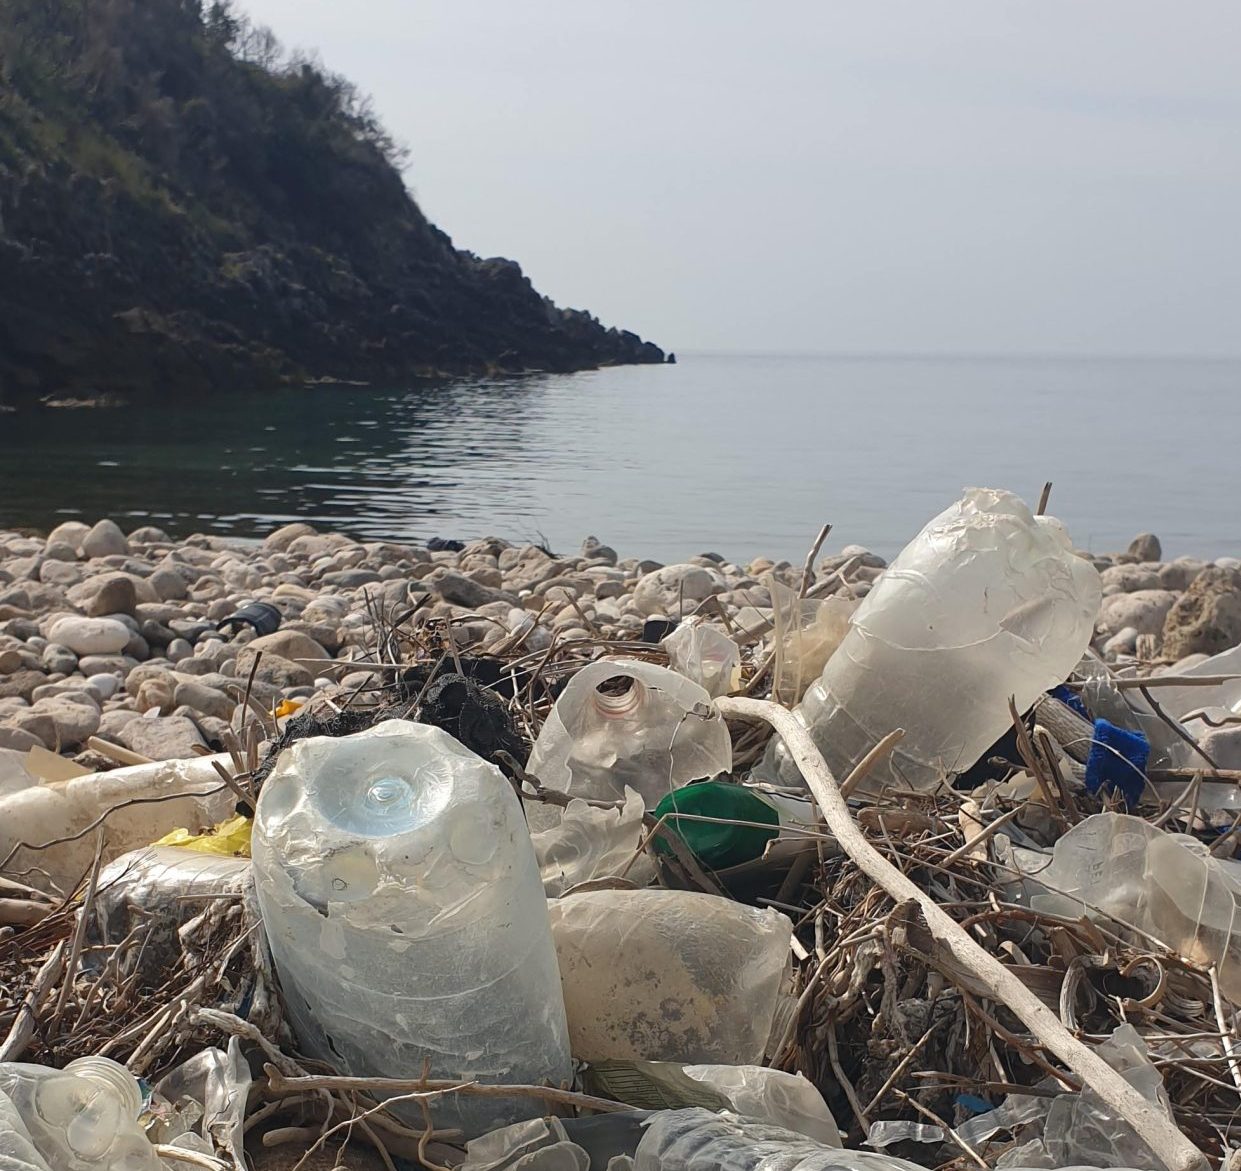 Tackling single-use plastics in the Adriatic region through public and private action